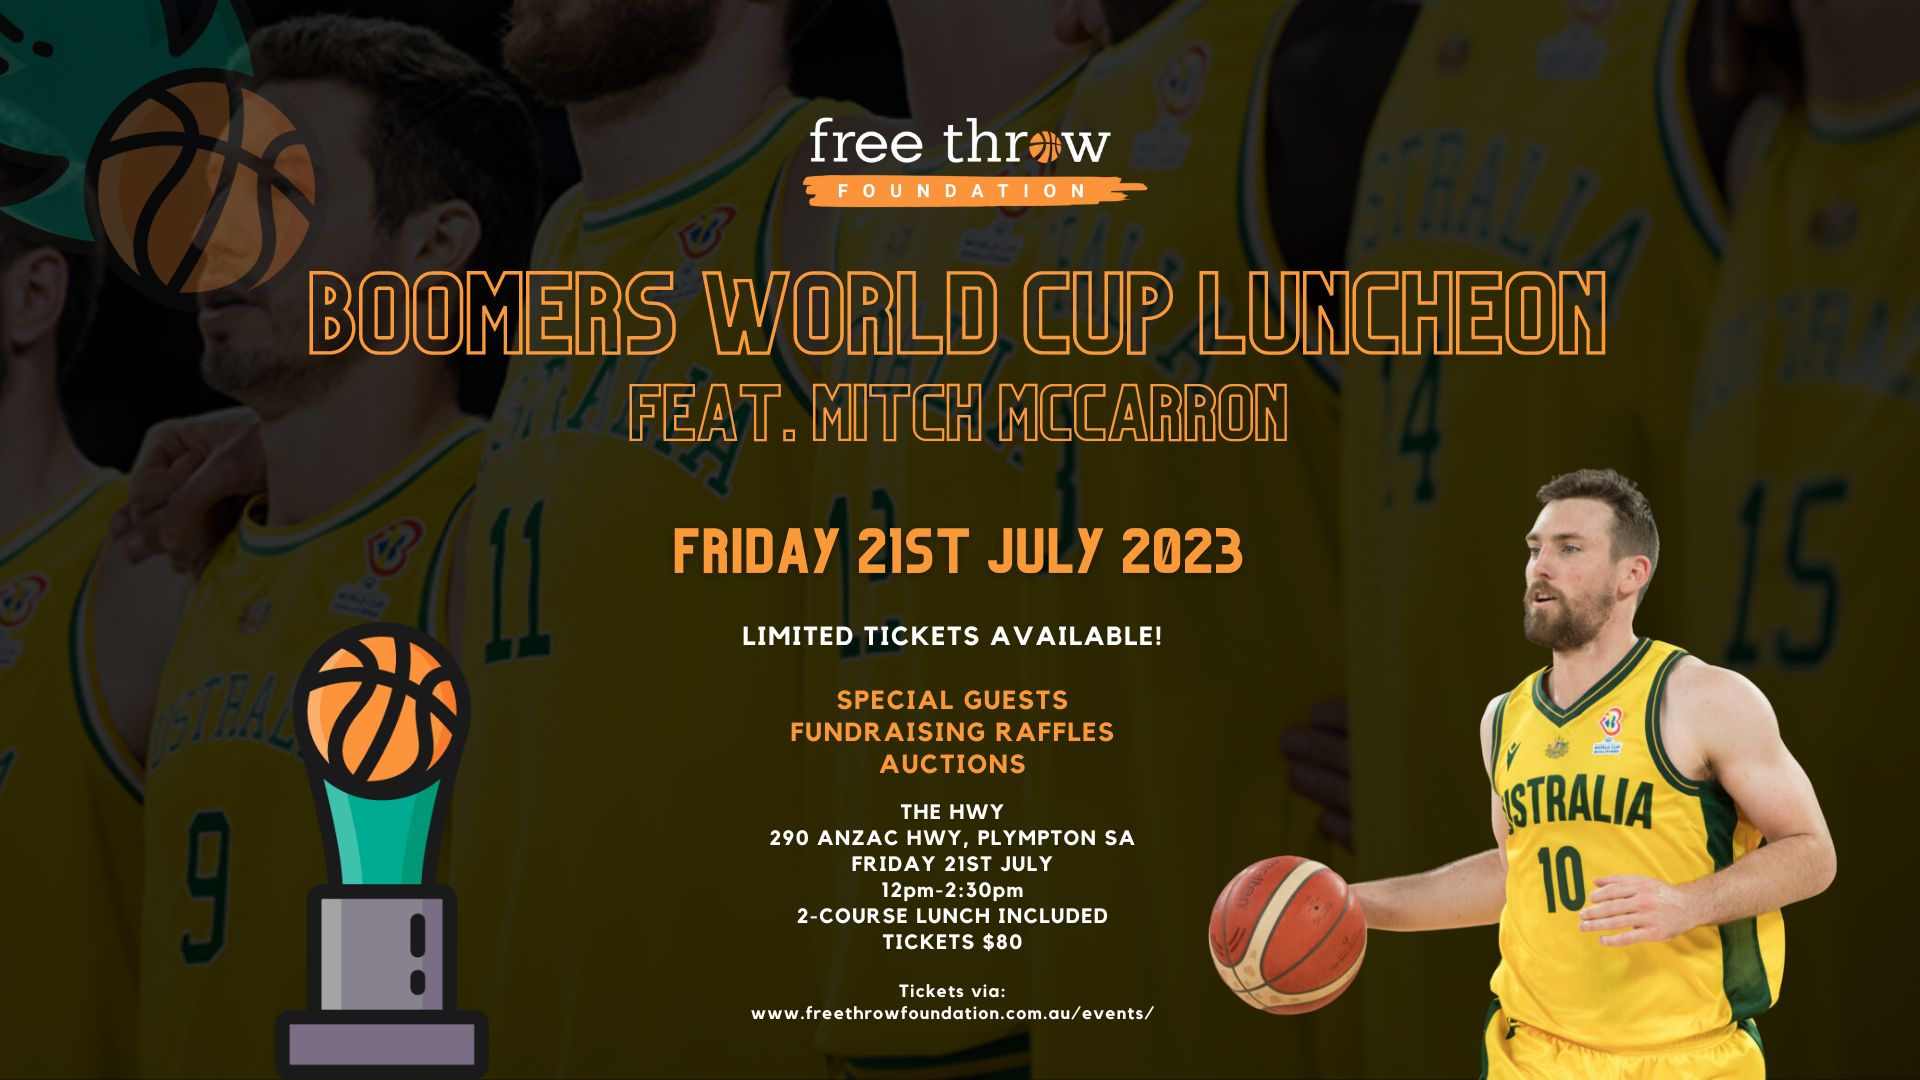 Featured image for “Boomers World Cup Luncheon feat. Mitch McCarron”